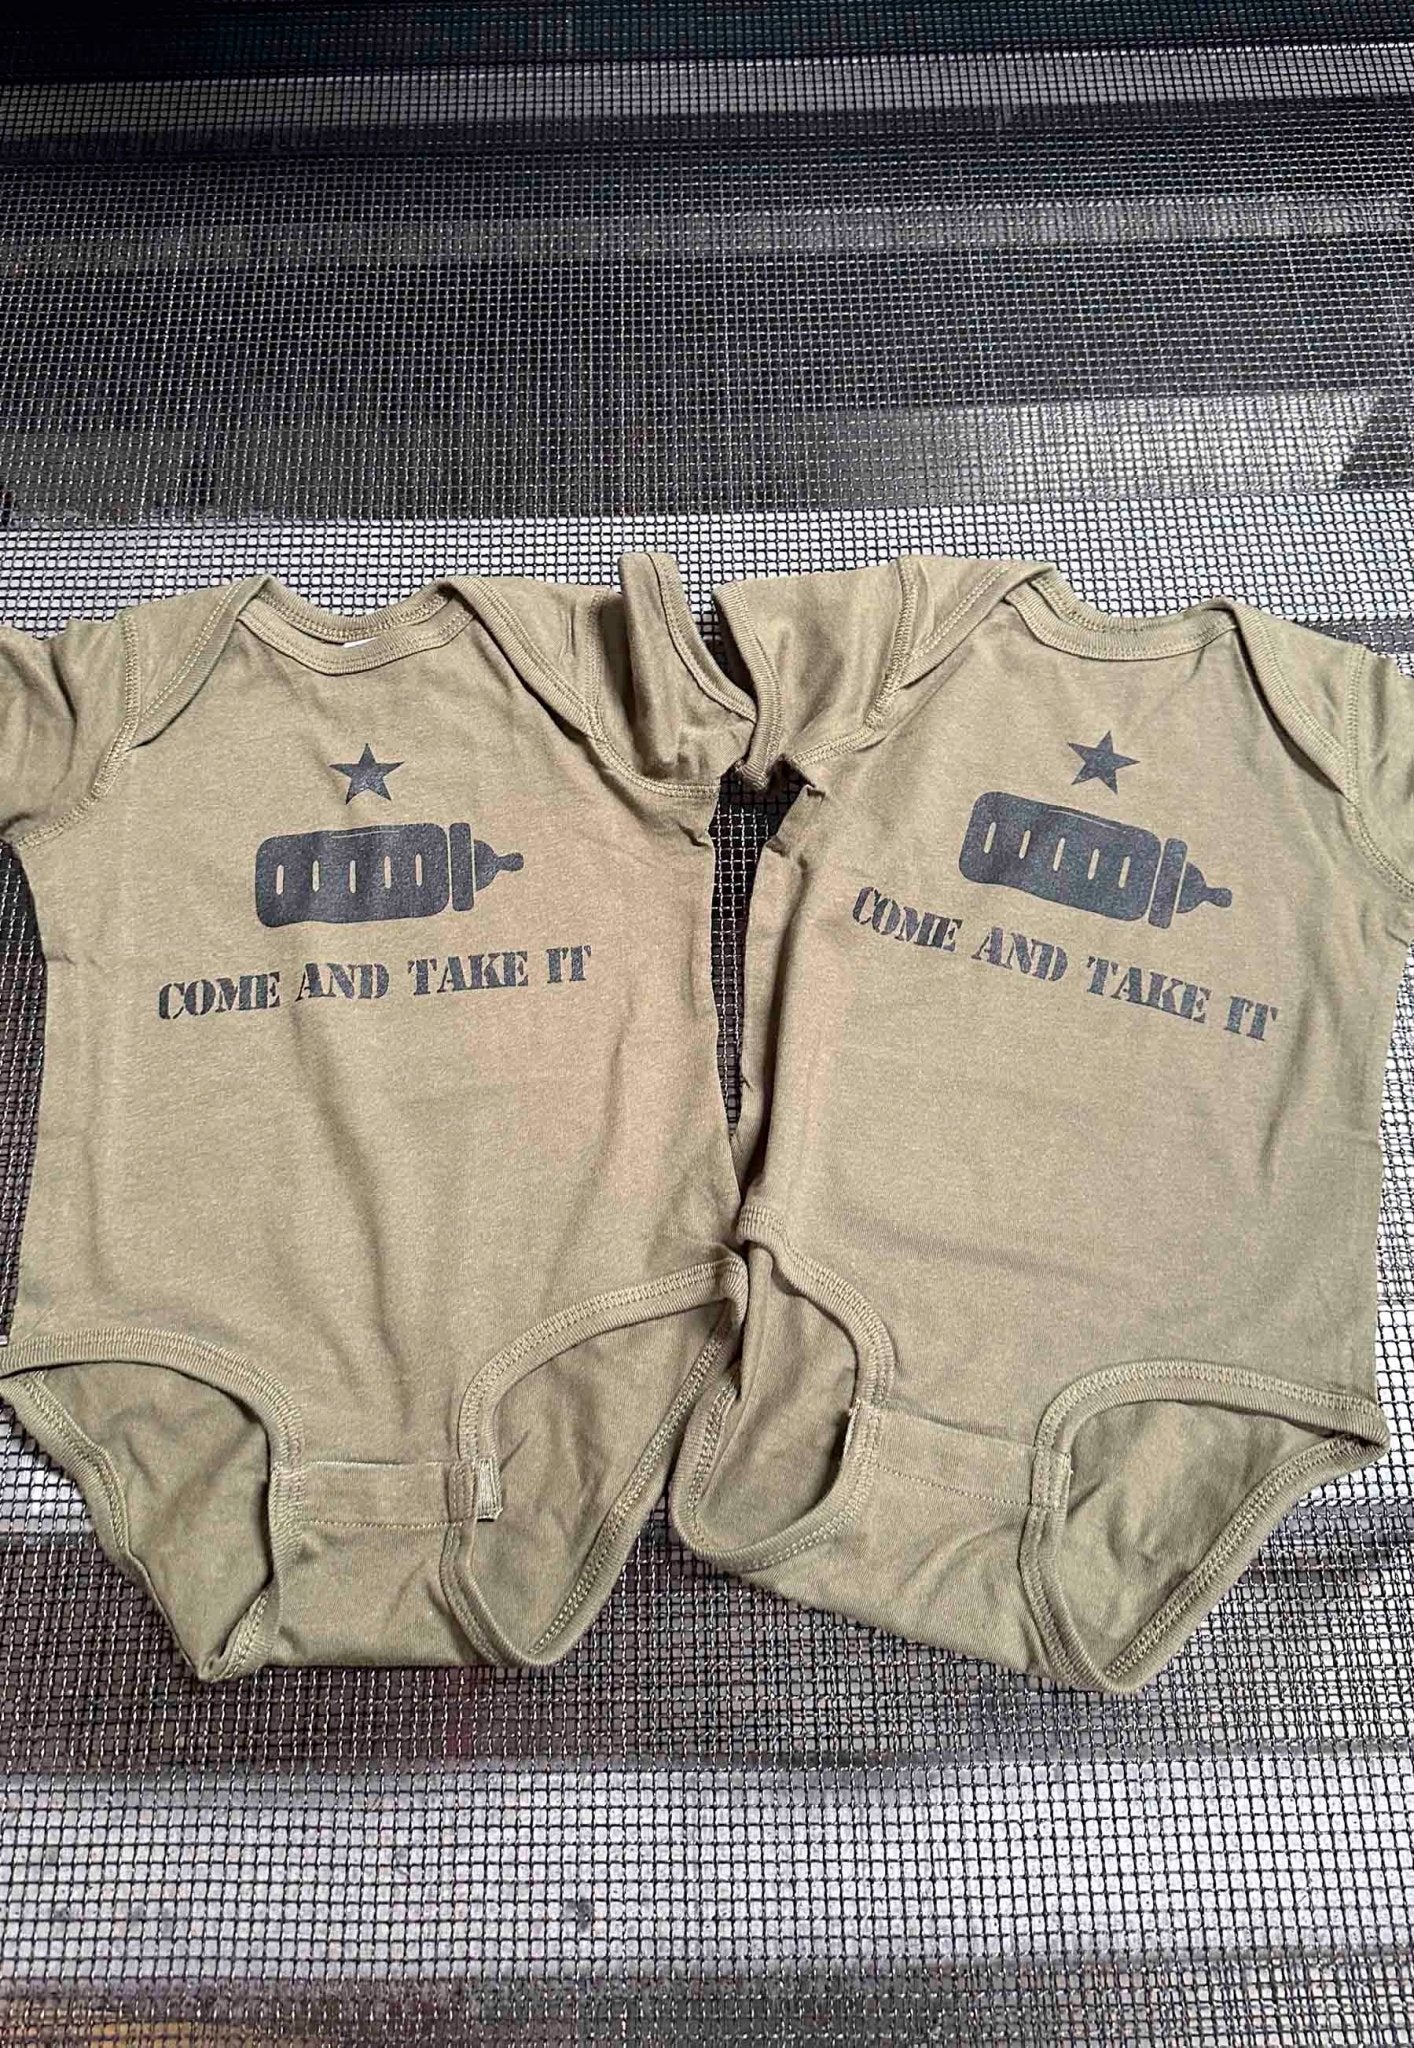 Come and Take it onesie - ArmedAF